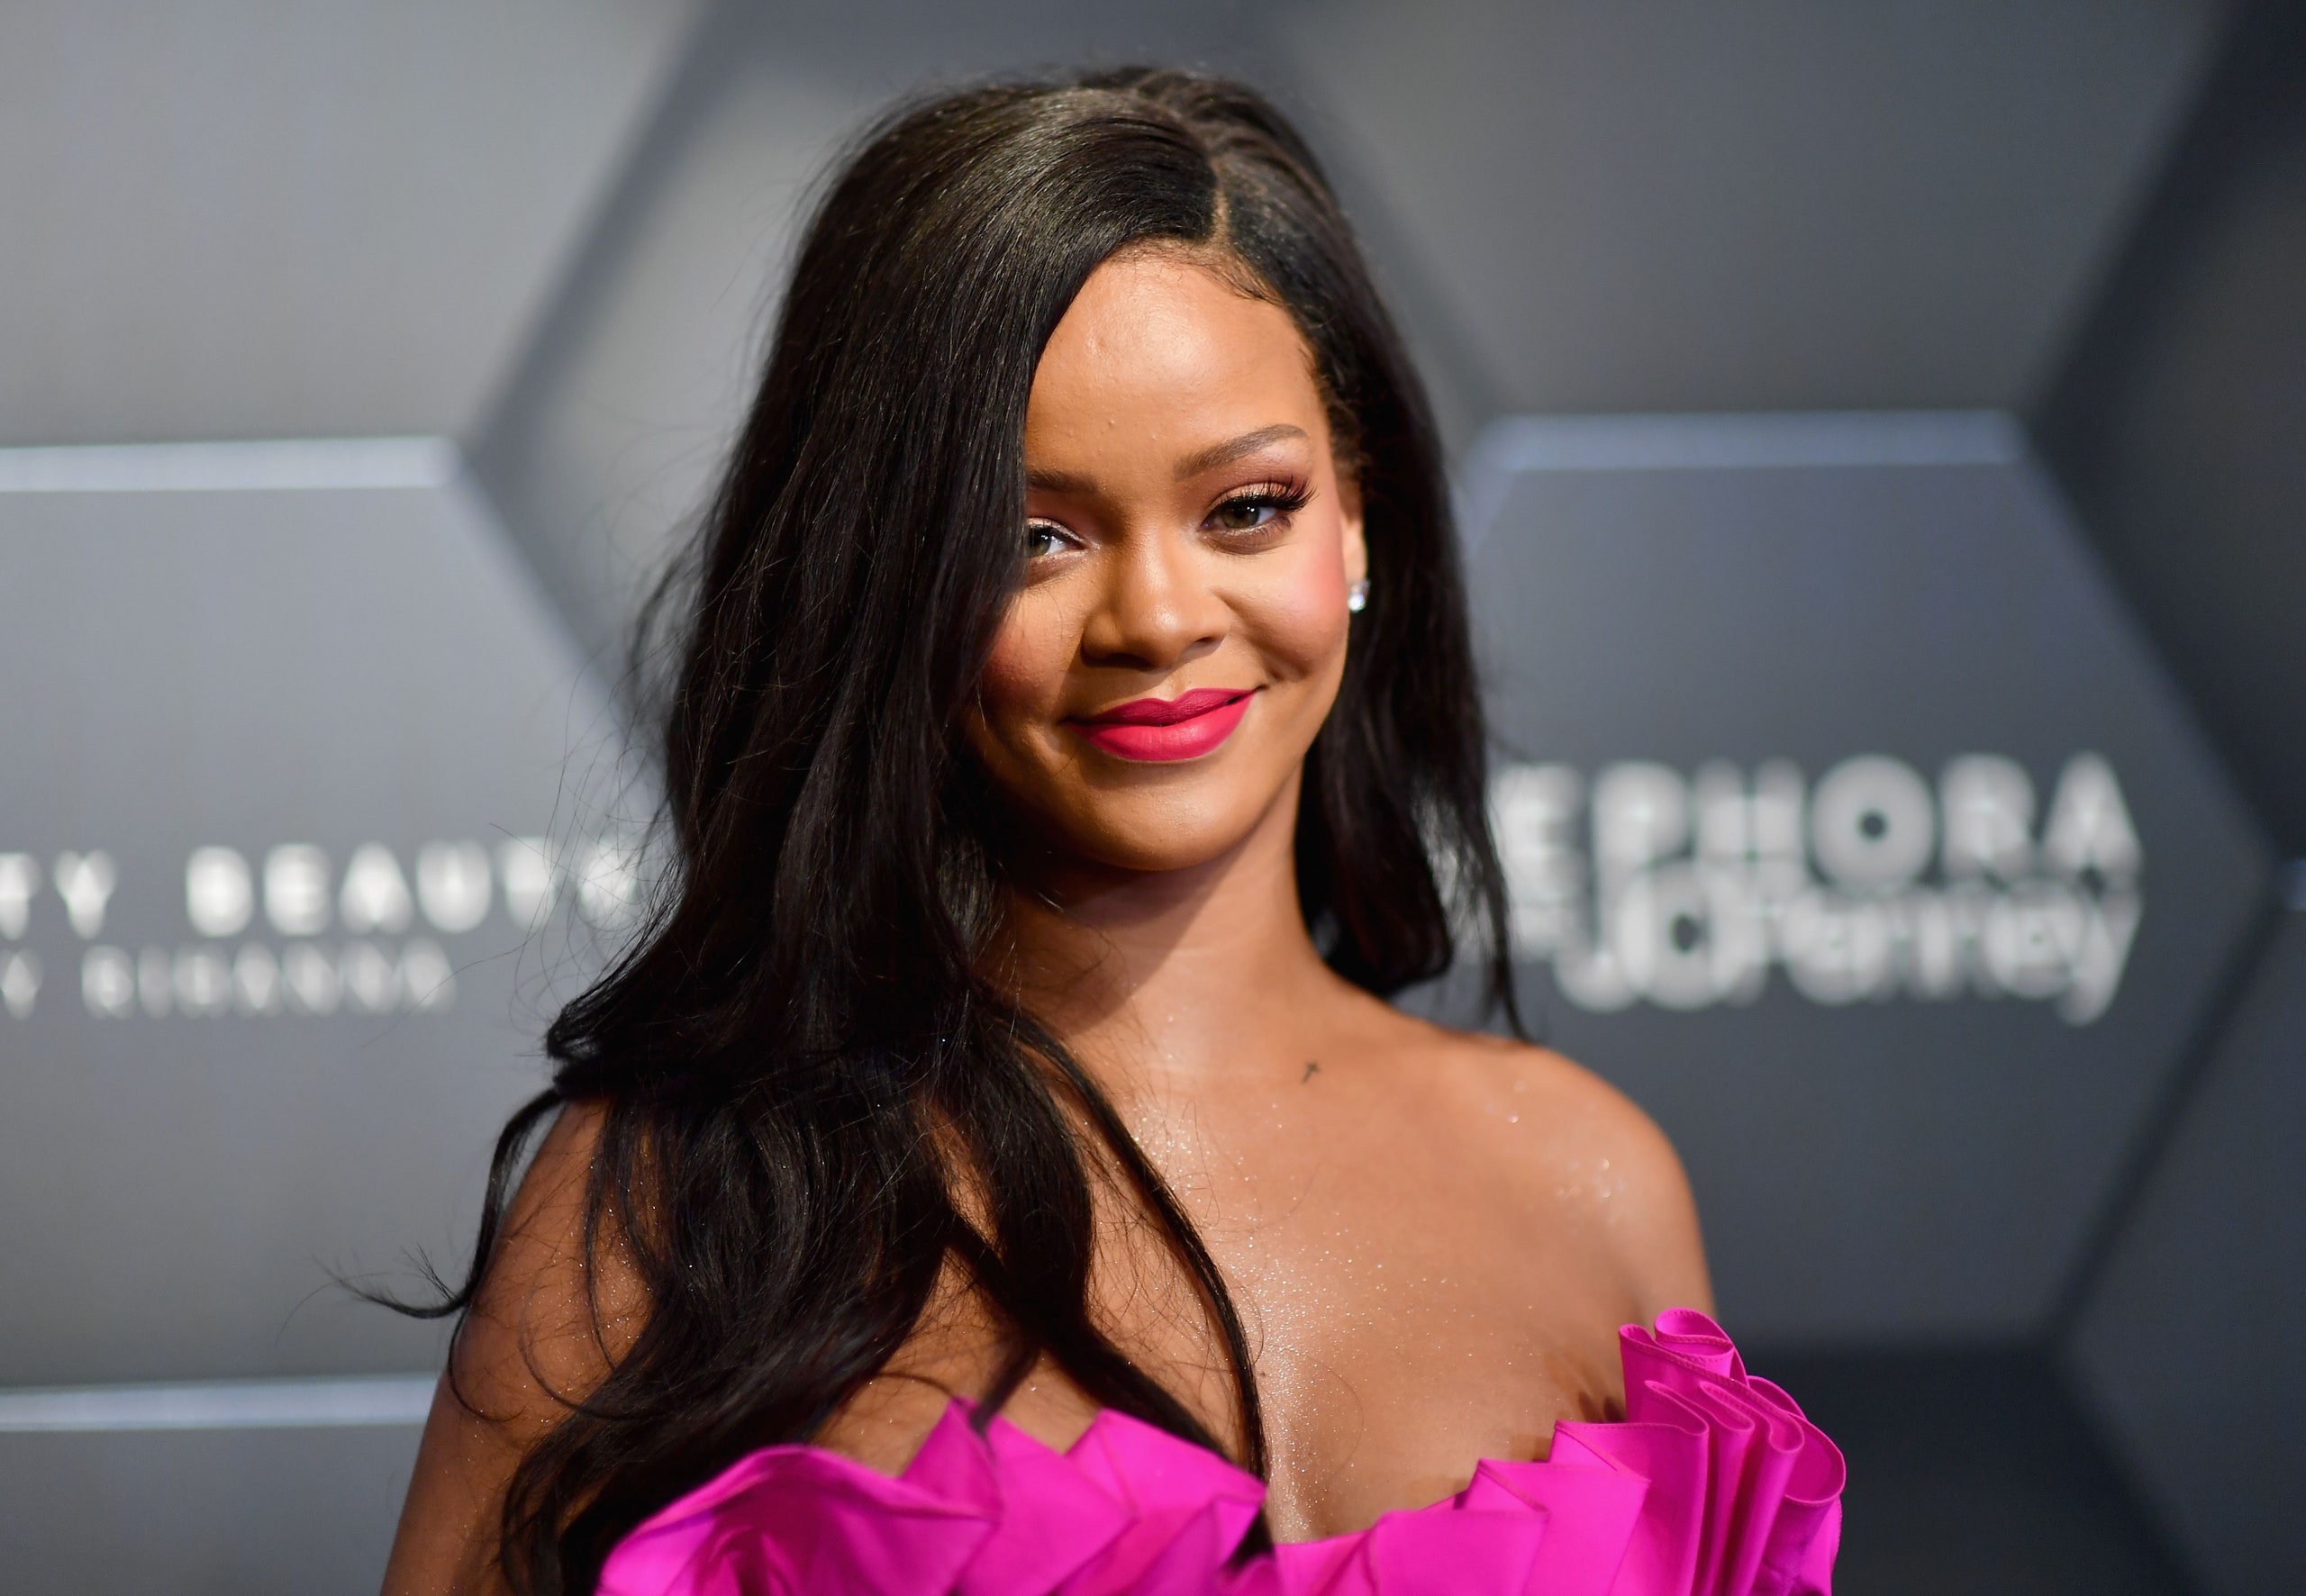 Rihanna Named a Billionaire 'richest female musician' by Forbes